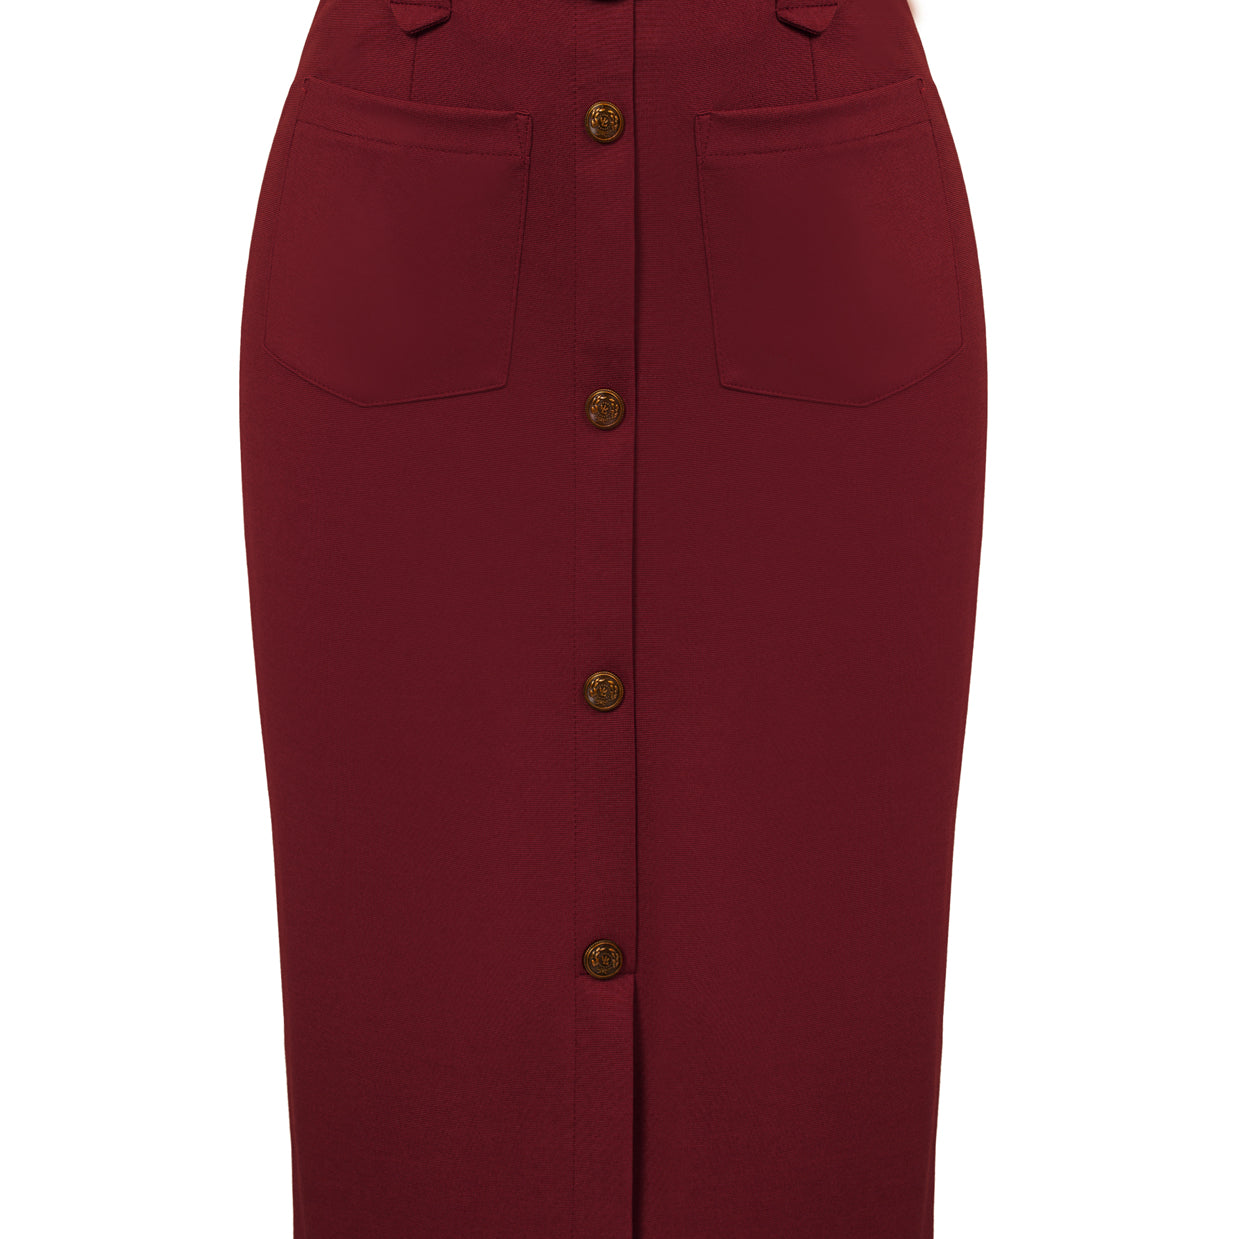 Pencil Skirt Knee Length High Waisted 1950s Vintage Office Work Bodycon Skirt with Pockets